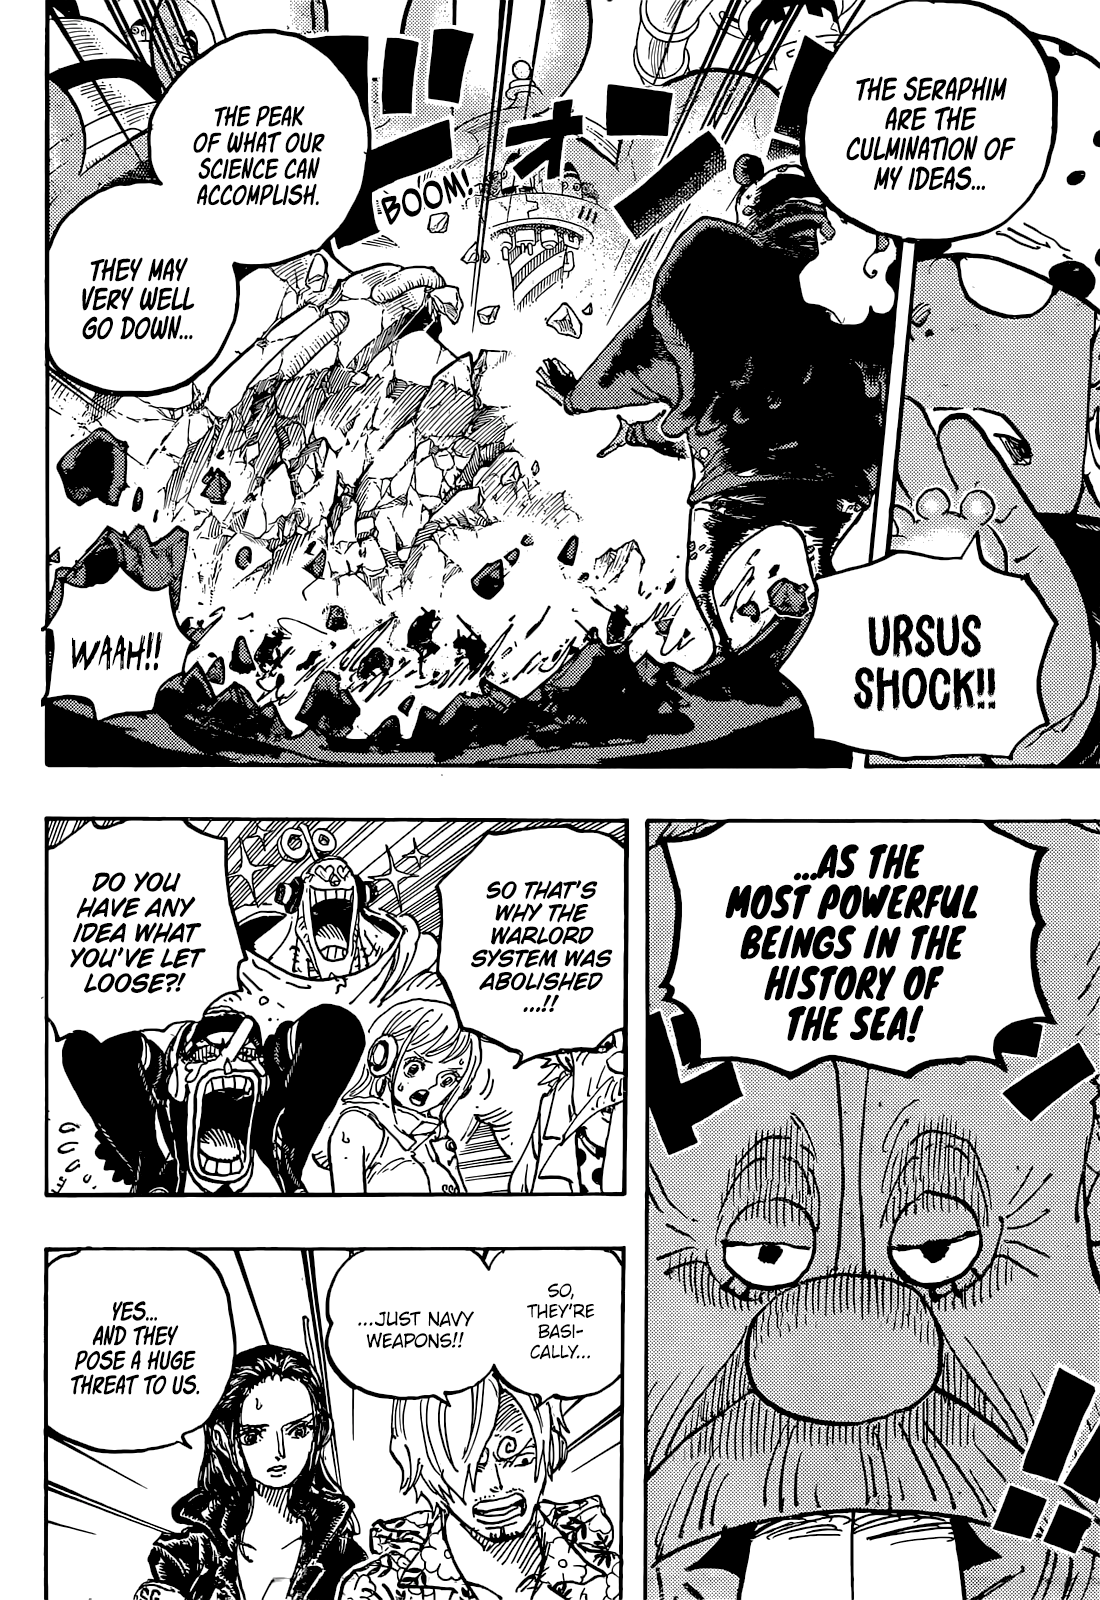 One Piece Chapter 1070 One Piece, Chapter 1070 | TcbScans Org - Free Manga Online in High Quality